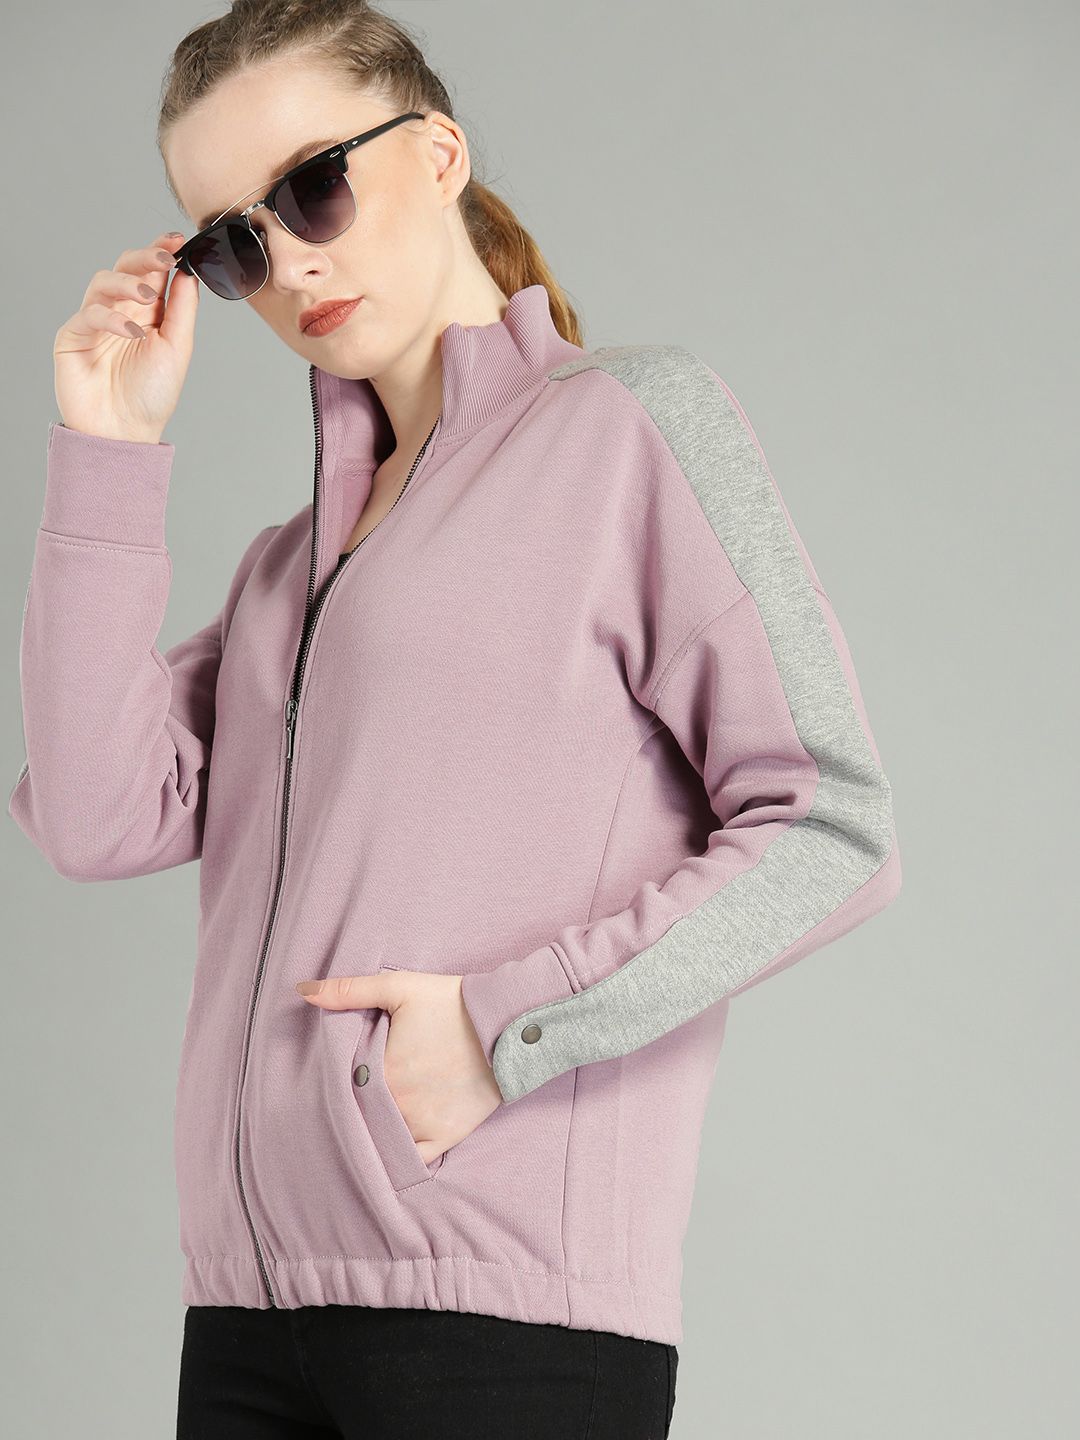 The Roadster Lifestyle Co Women Lavender & Grey Solid Sweatshirt Price in India